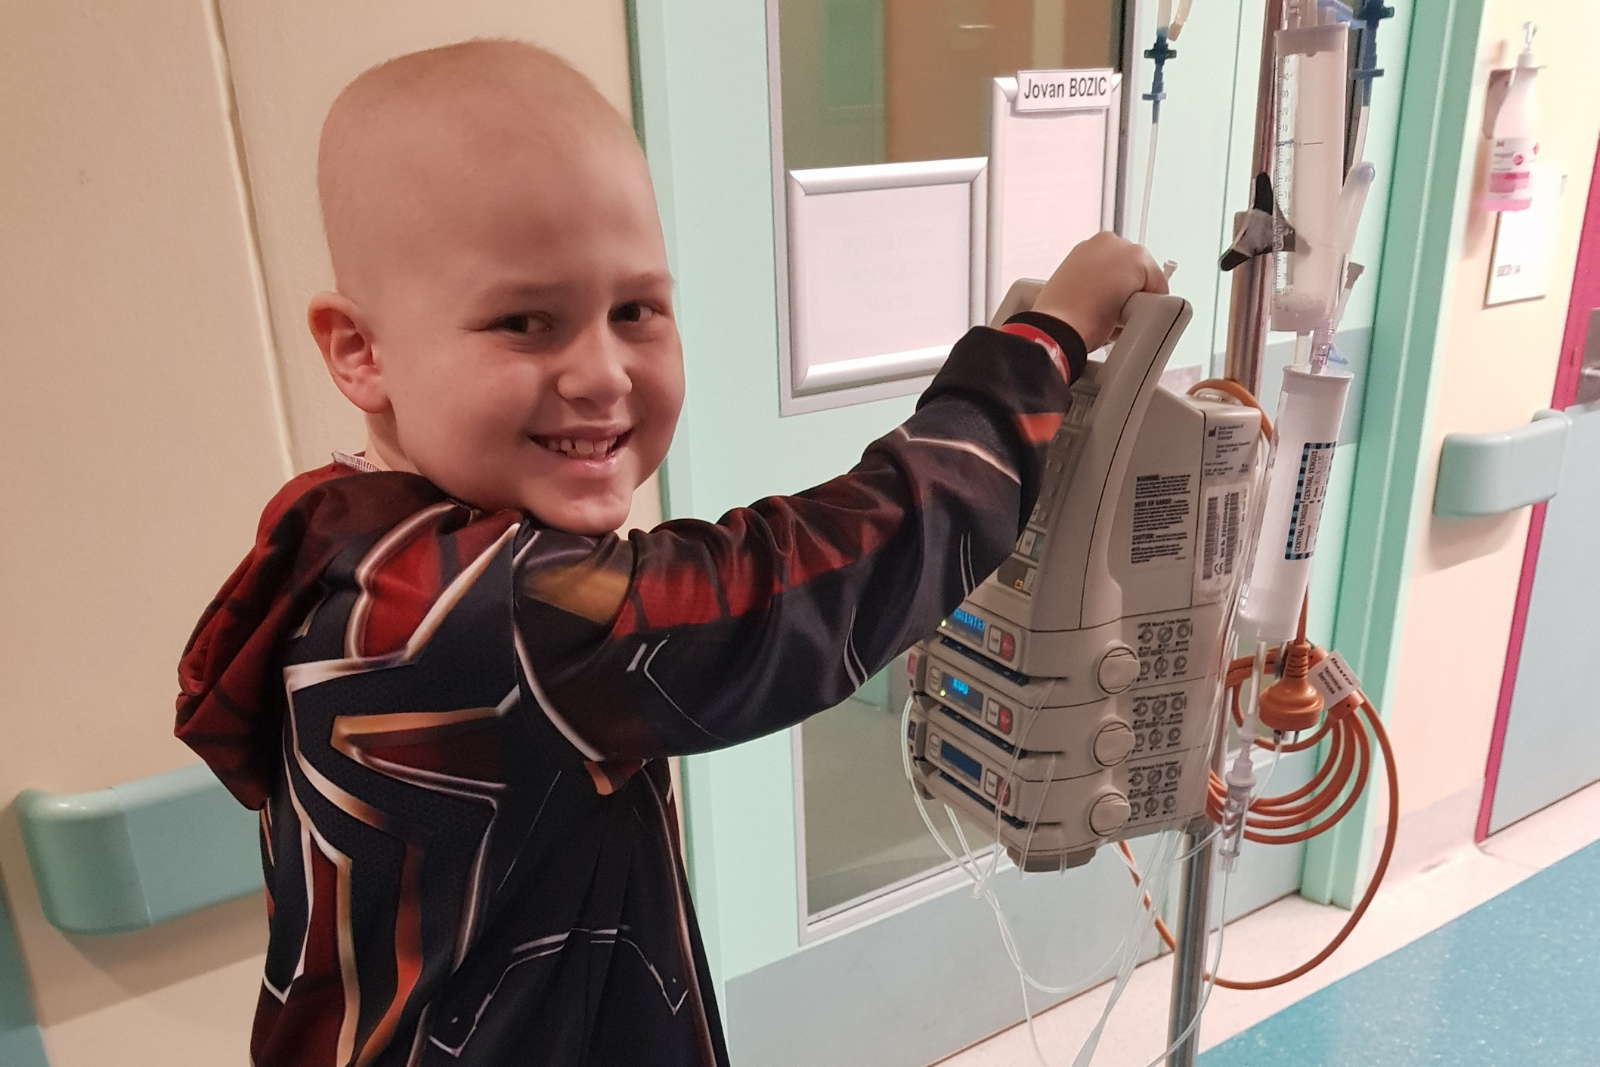 A smiling young boy holding a hospital machine